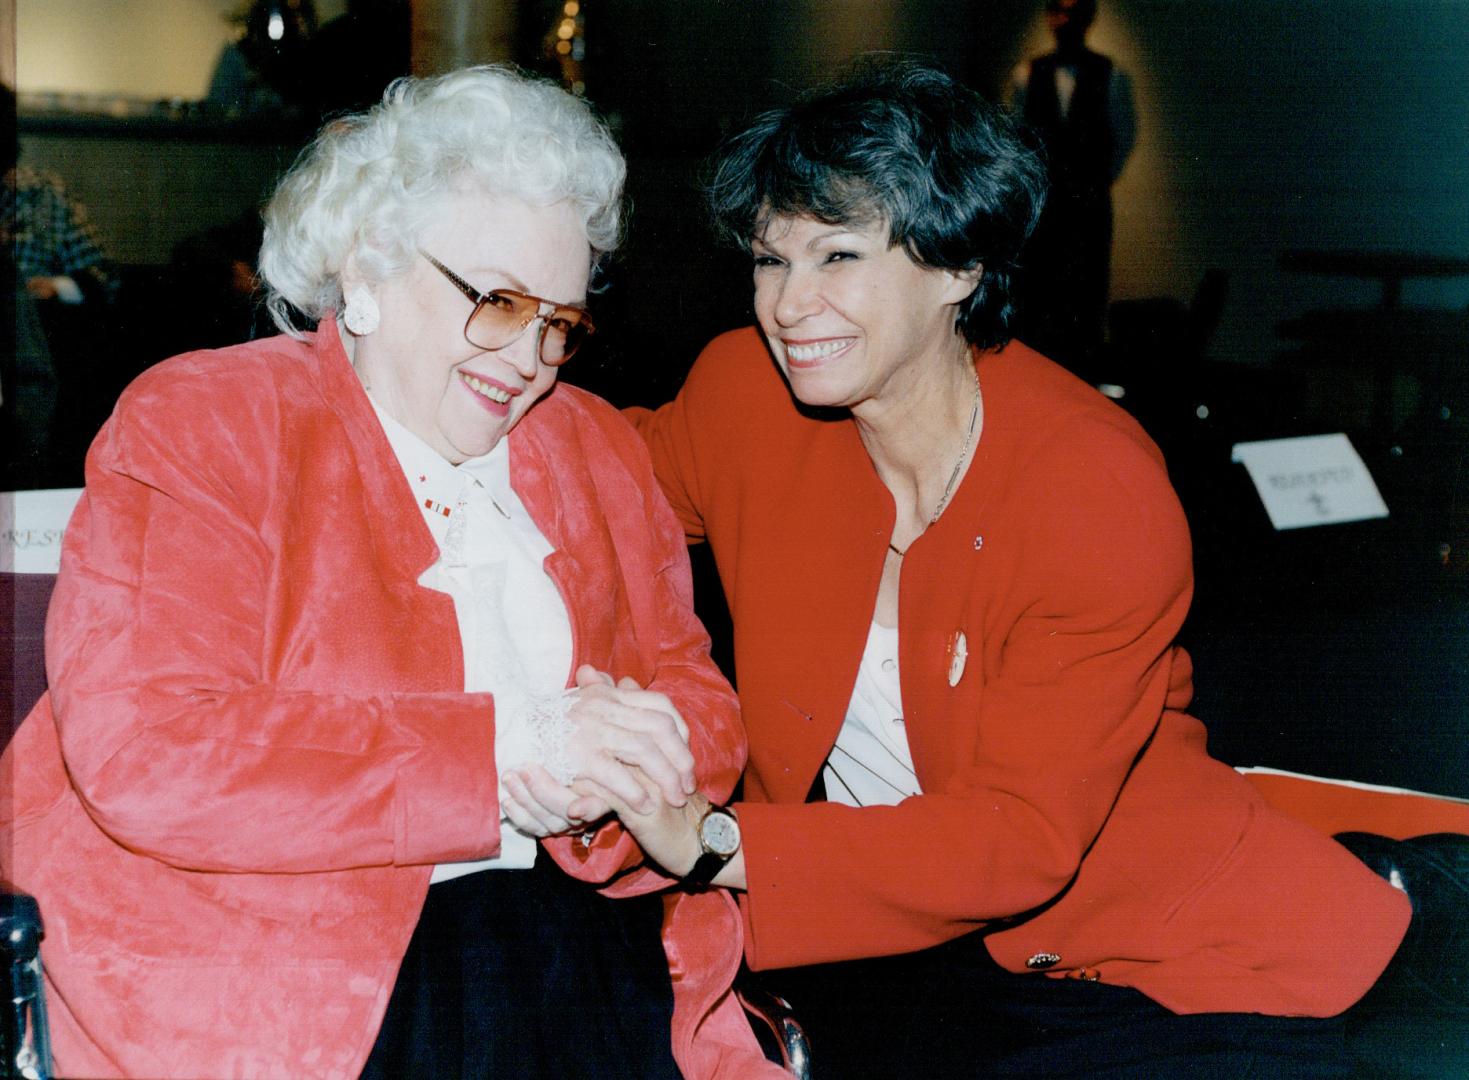 Monique Mercure and Lois Marshall